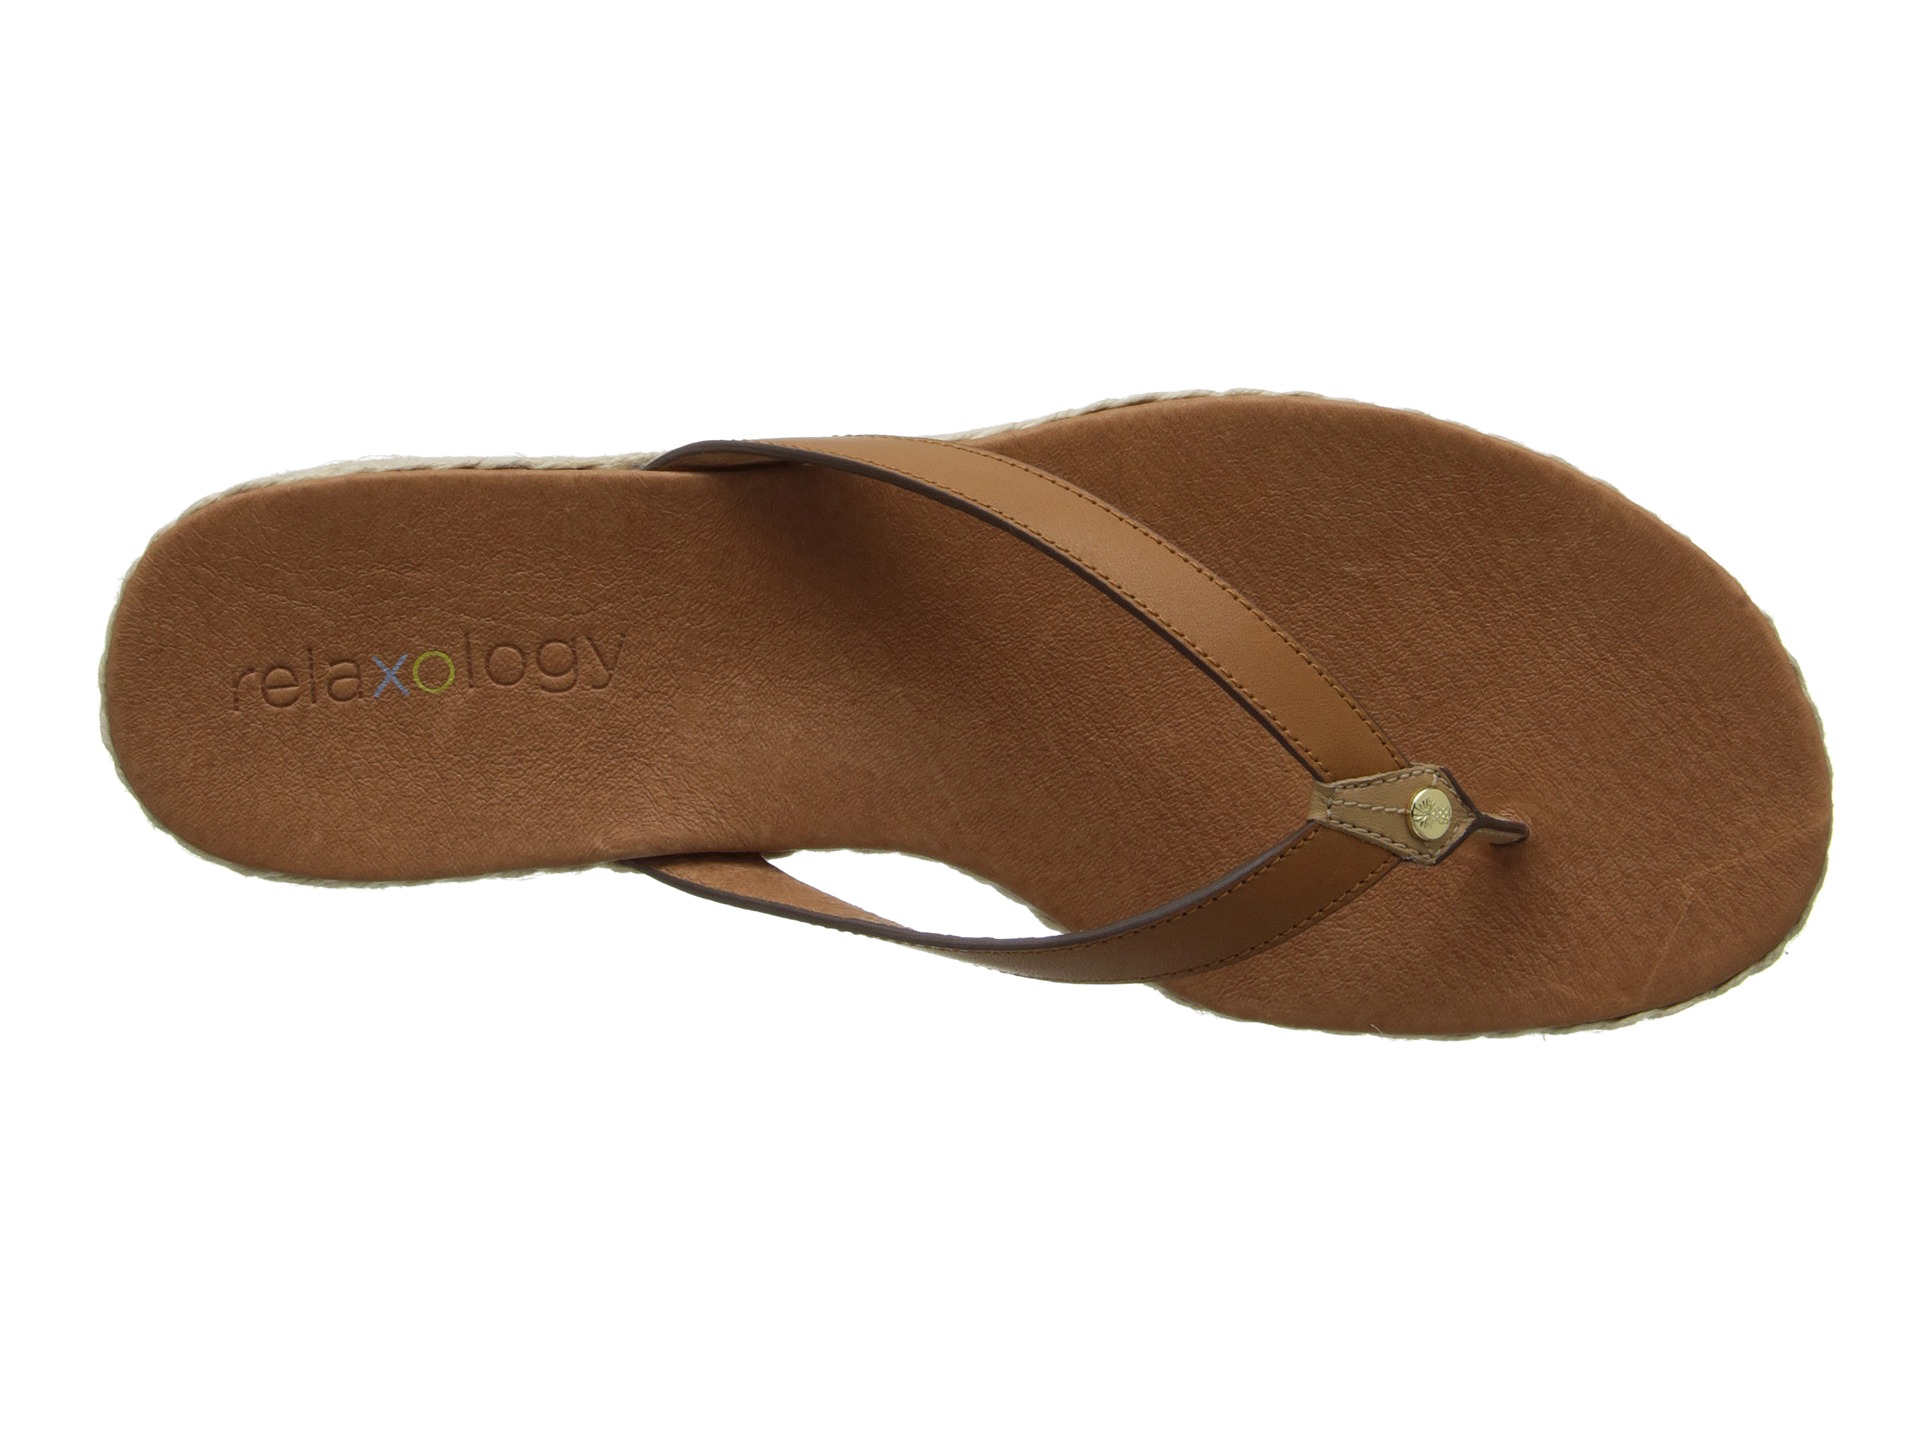 Tommy Bahama Relaxology Flip Flop | Shipped Free at Zappos